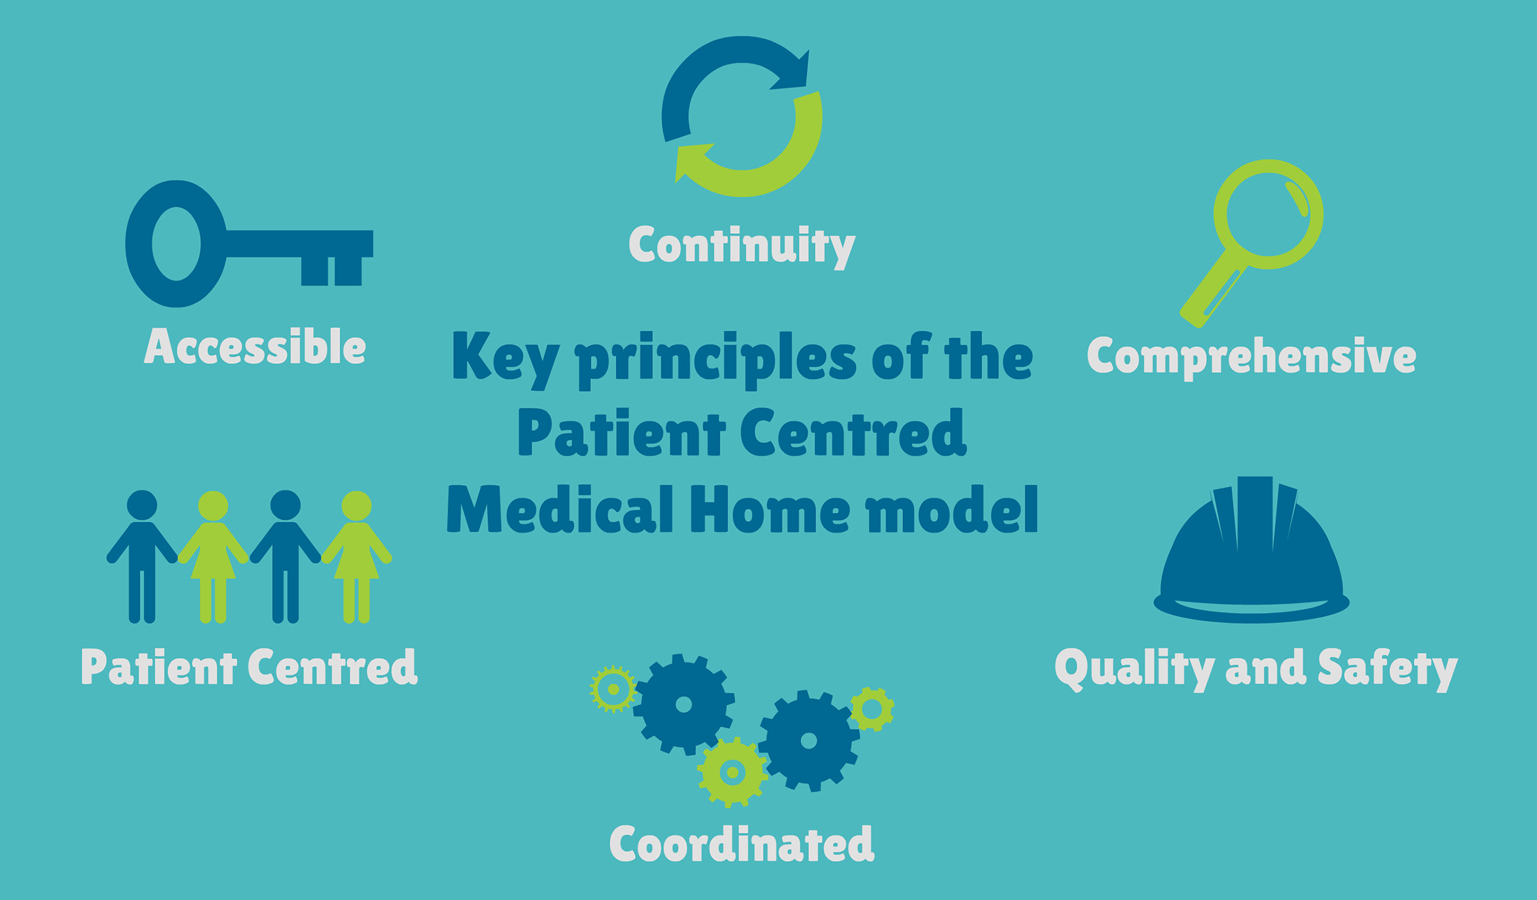 Patient Centred Medical Home model